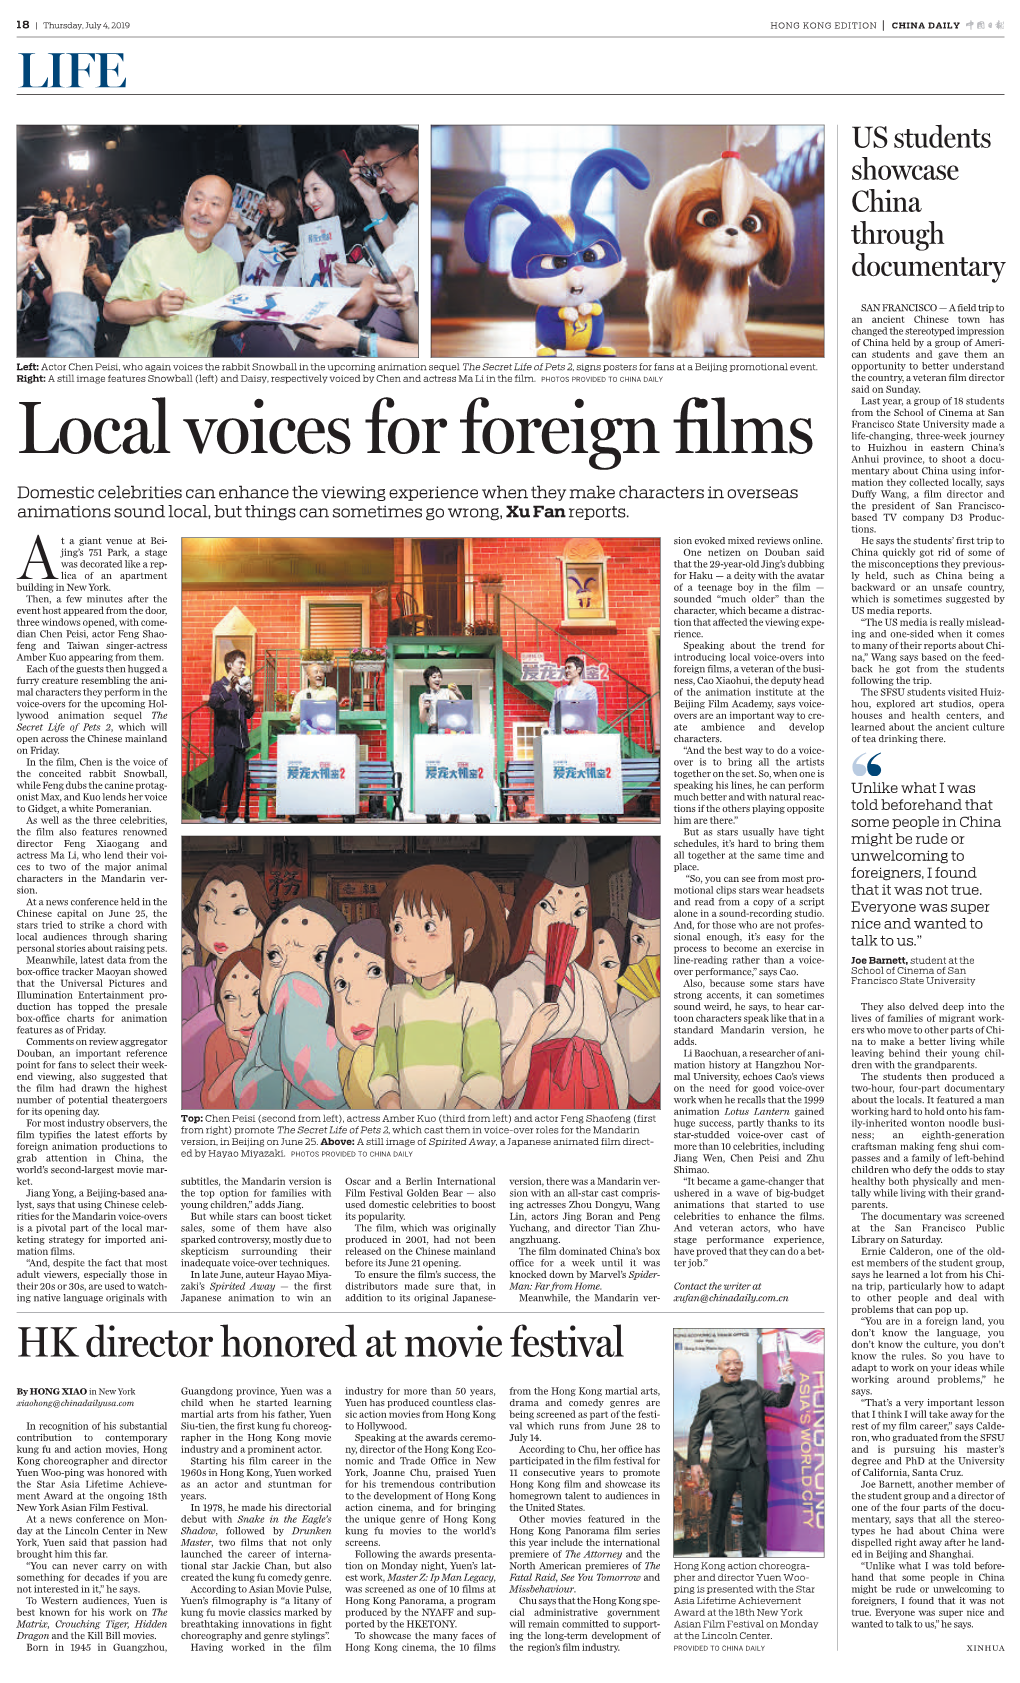 Local Voices for Foreign Films